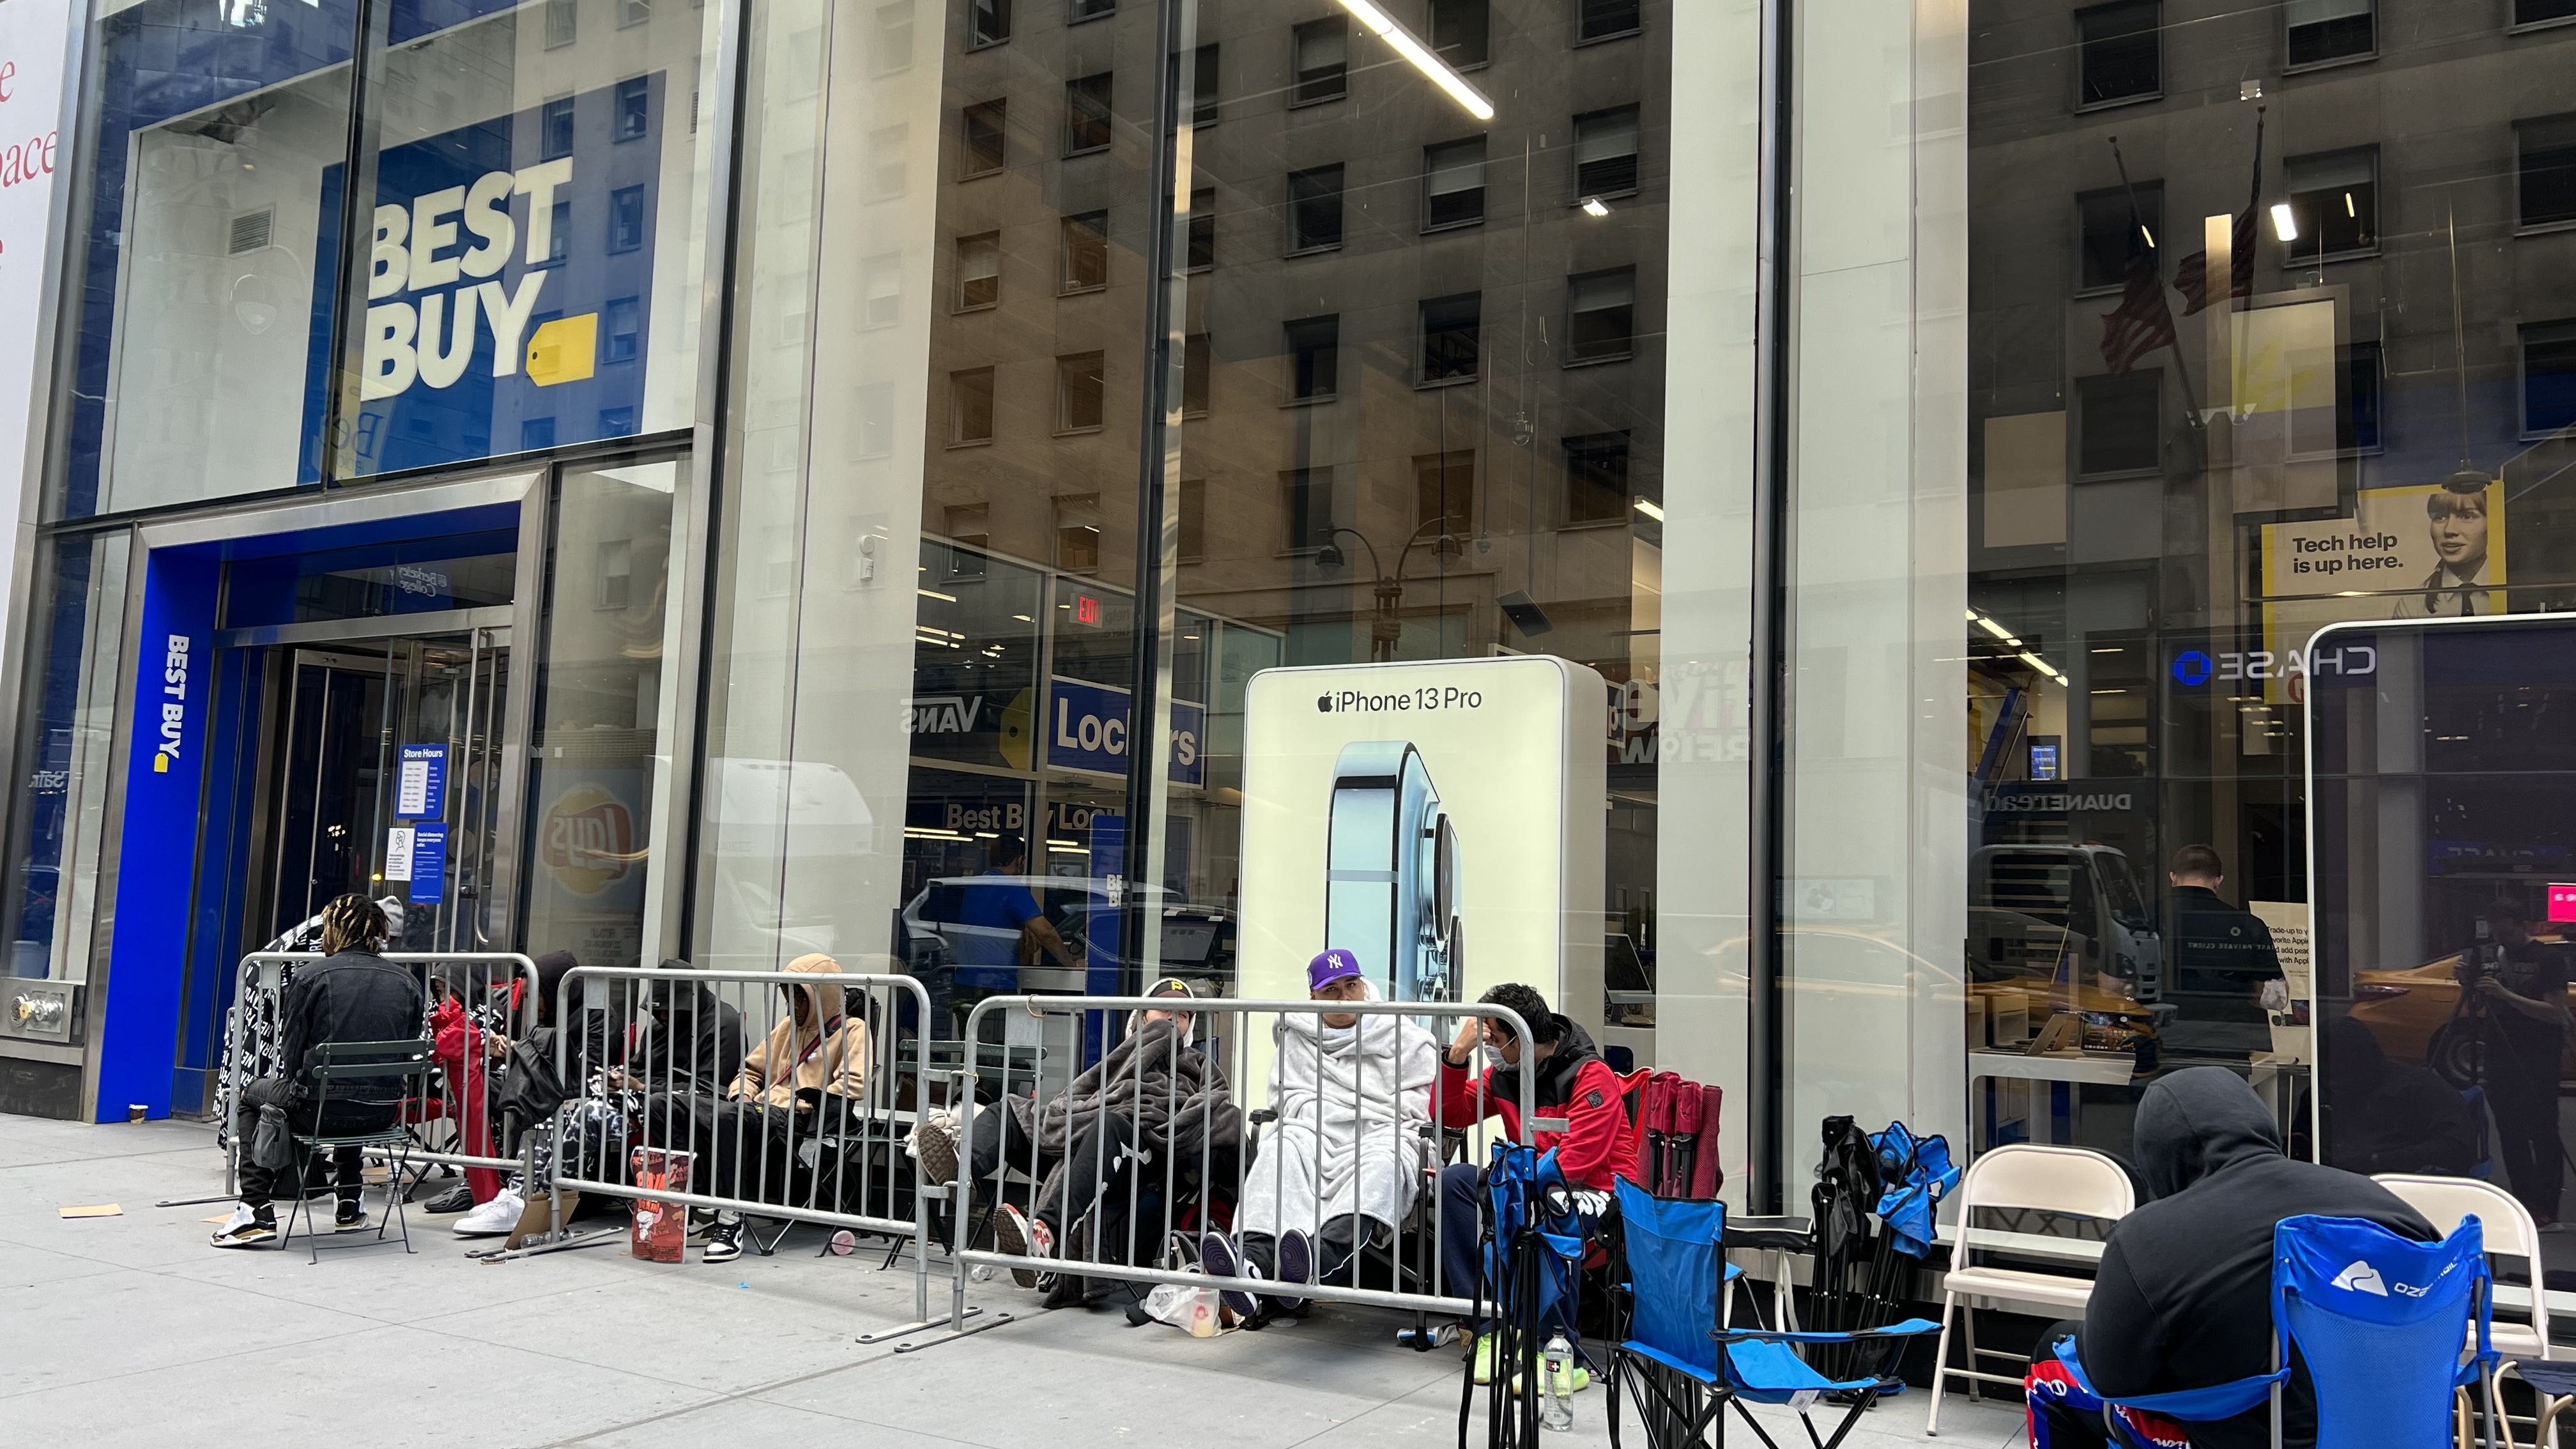 People in NYC are lining up to get a new graphics card from Best Buy